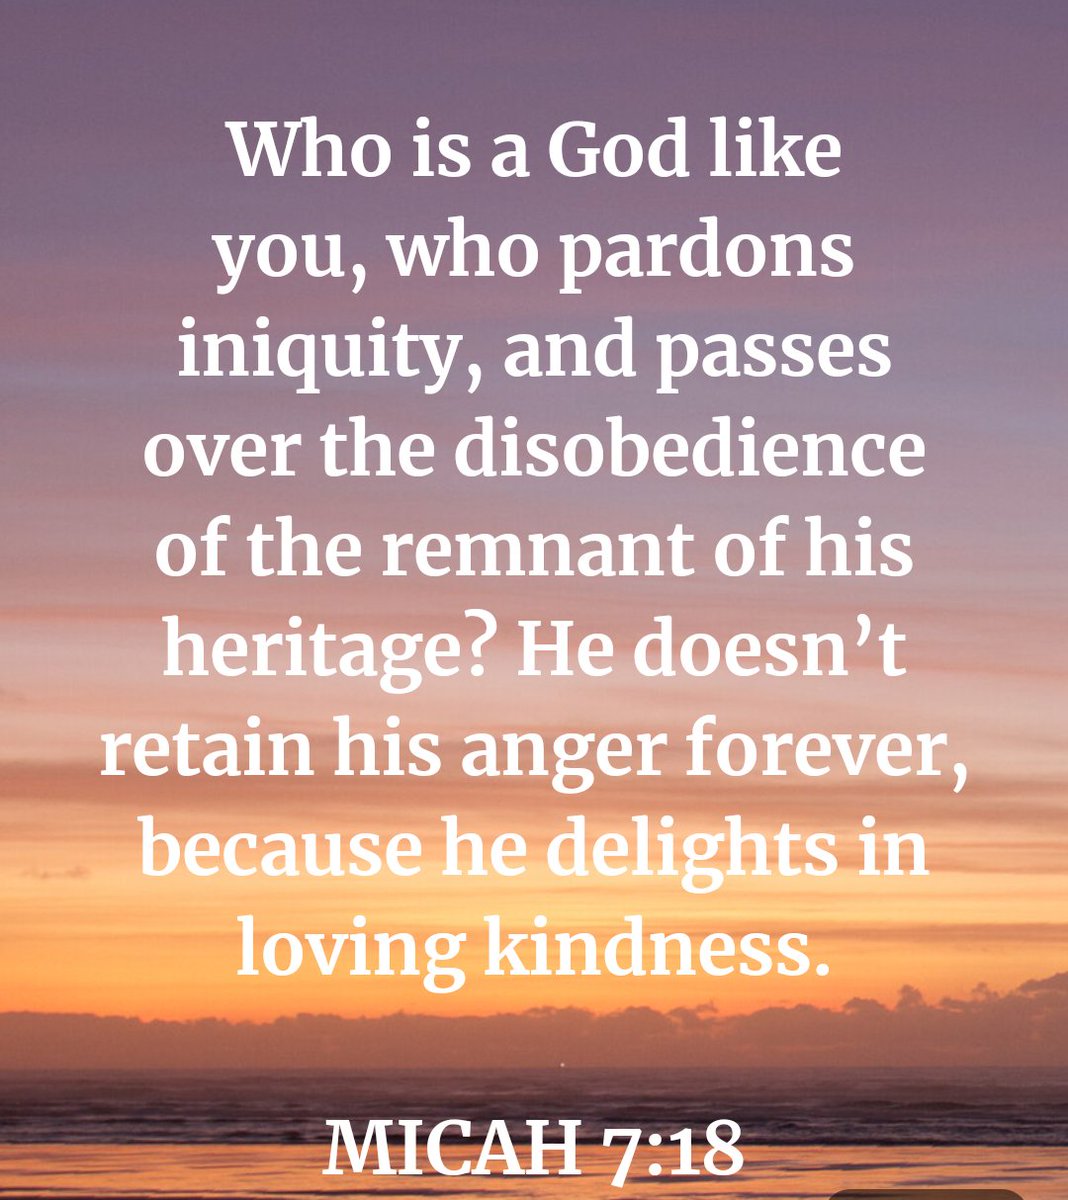 Today's Bible verse from Micah 7:18

#GodIsKind #VerseOfTheDay